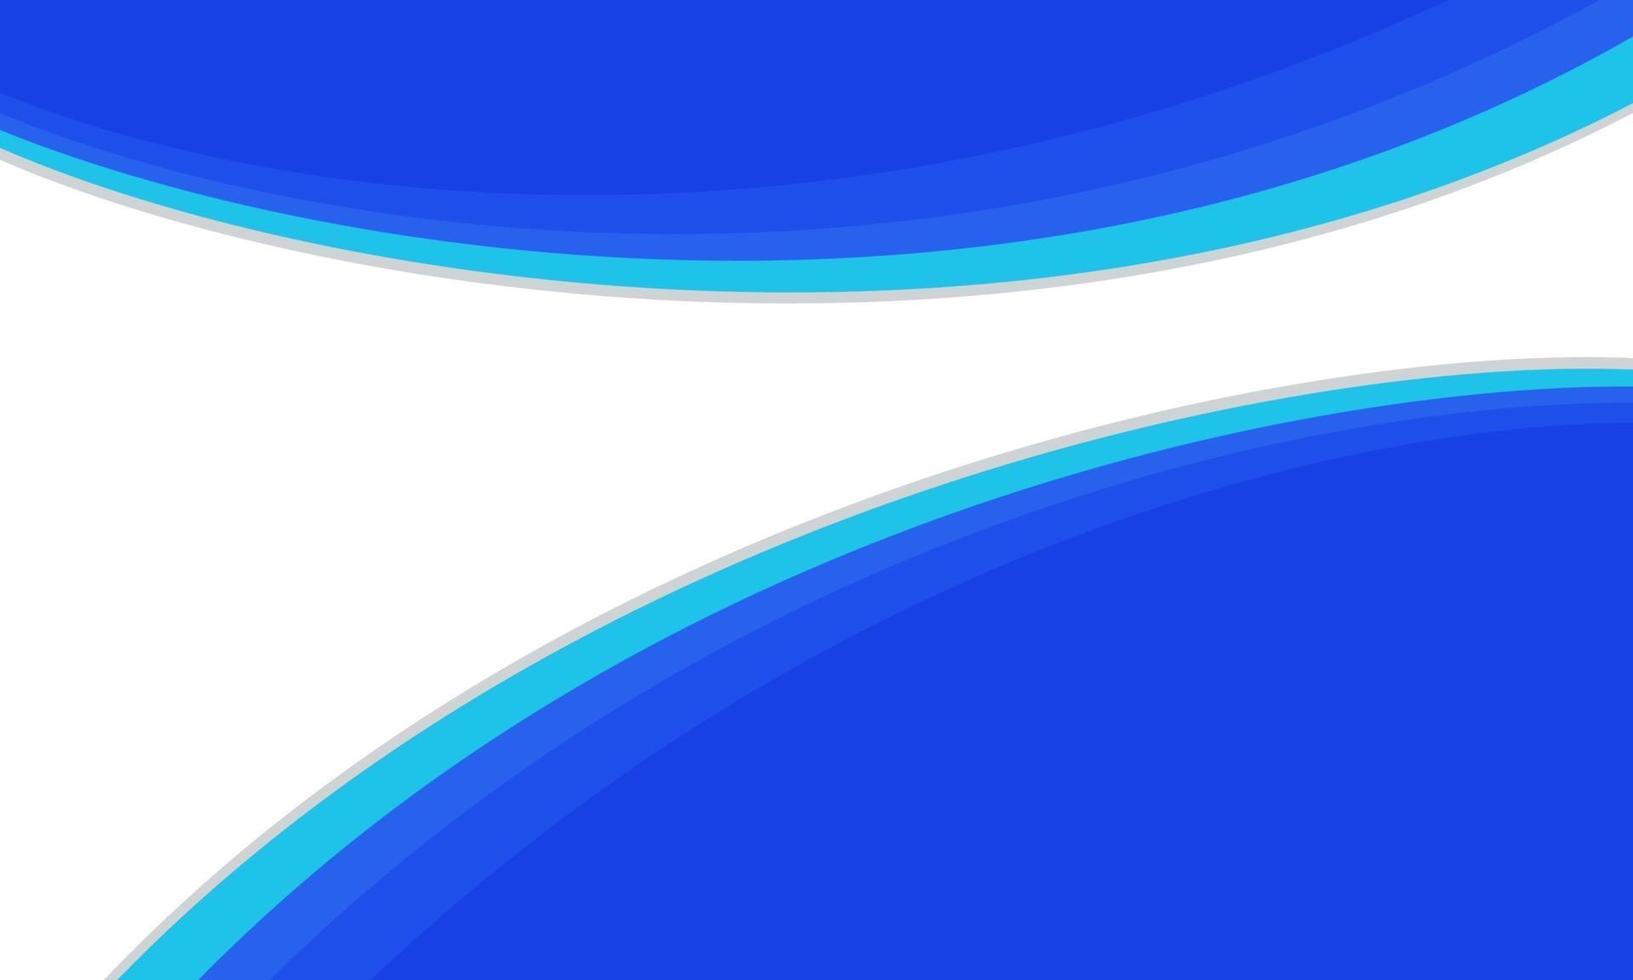 Beautiful Blue Cover Background With Curved Shapes vector